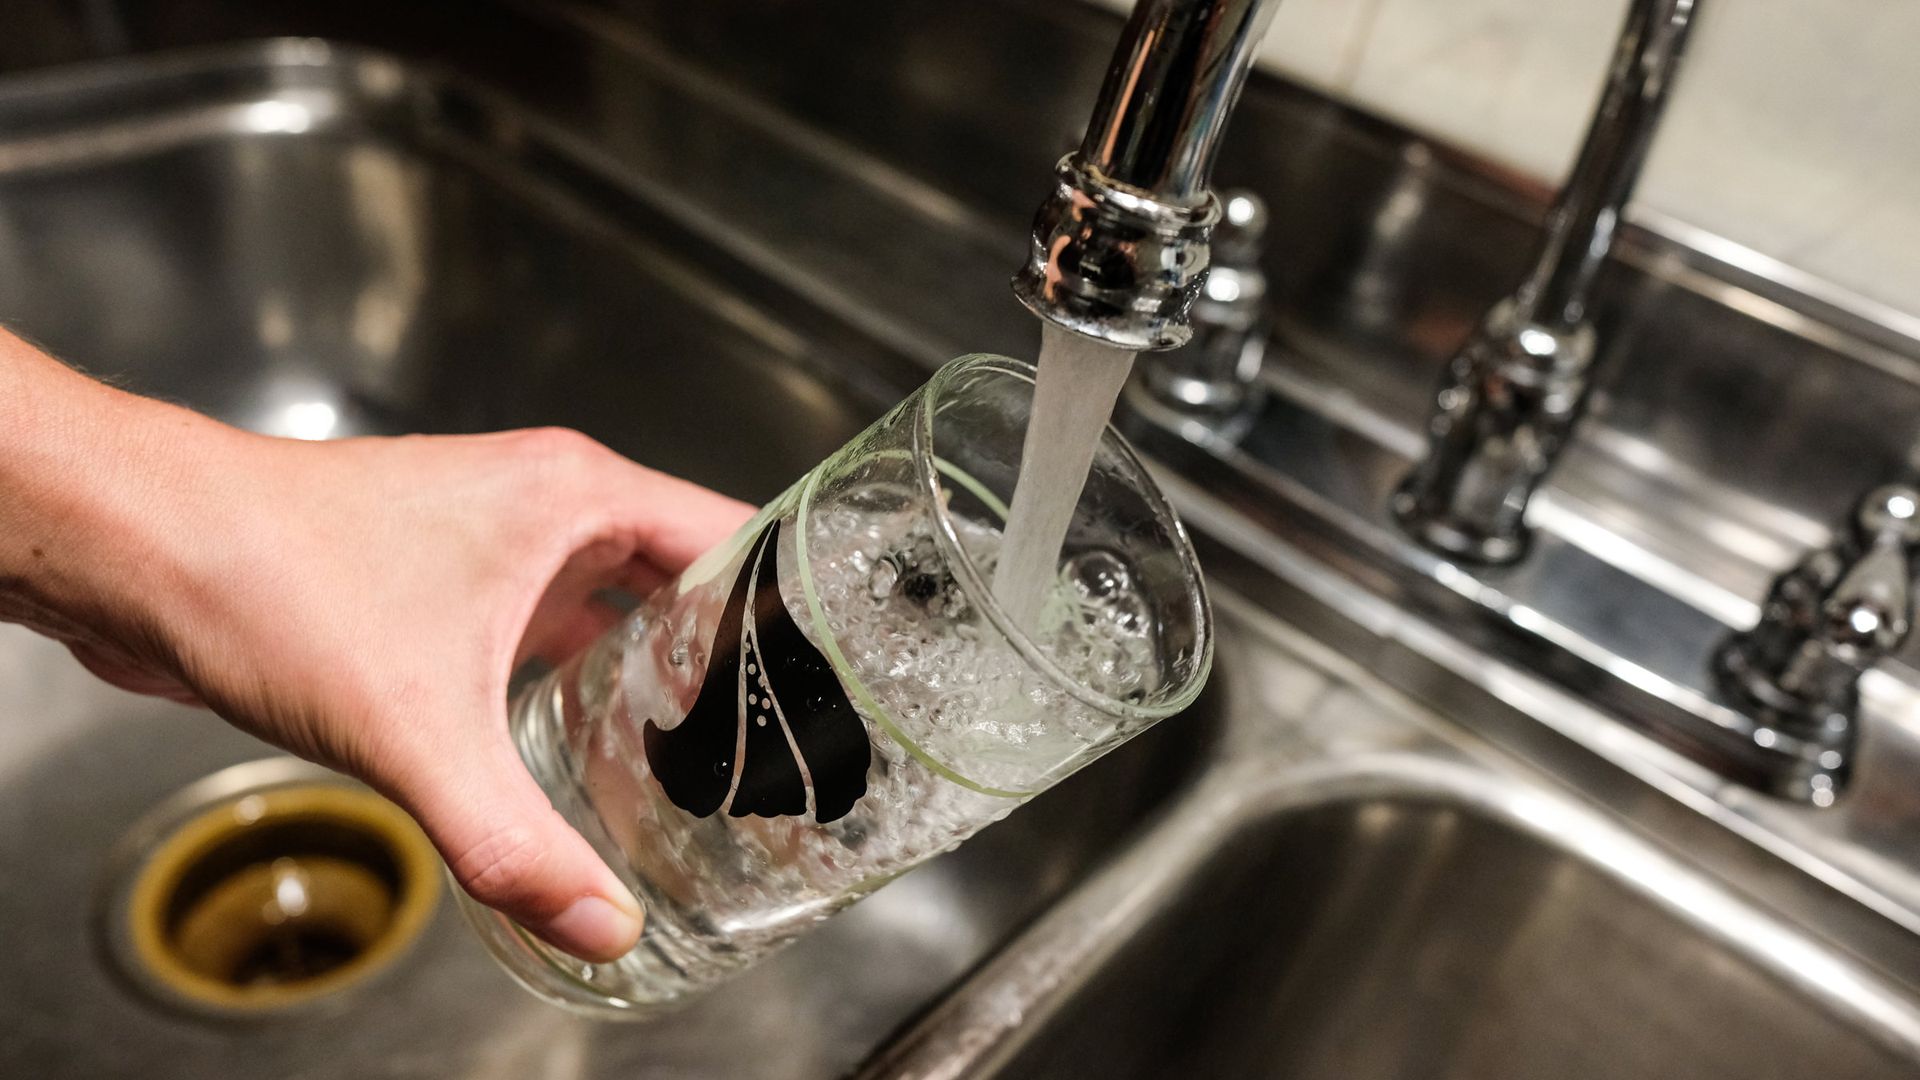 Hand holding a glass of water as it fills from a kitchen faucet